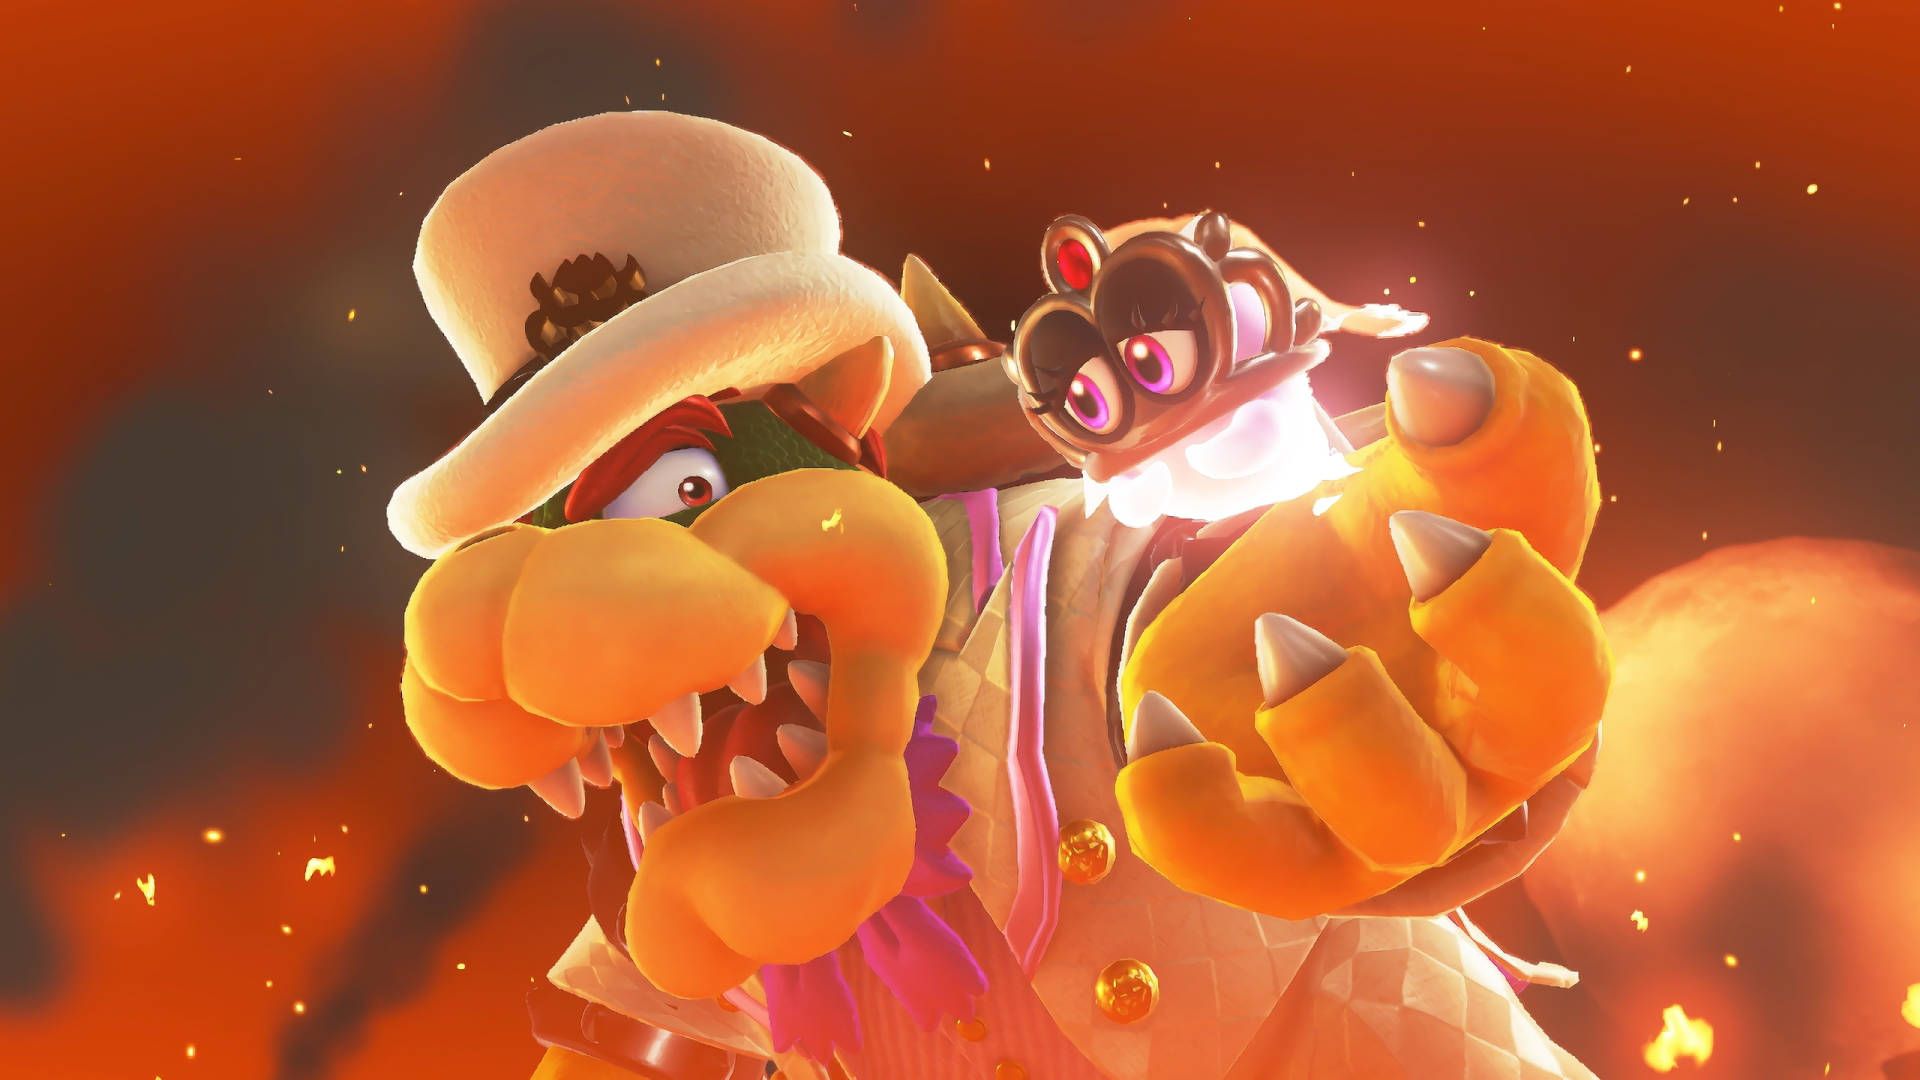 Bowser is wearing a white suit and hat in this image - Bowser